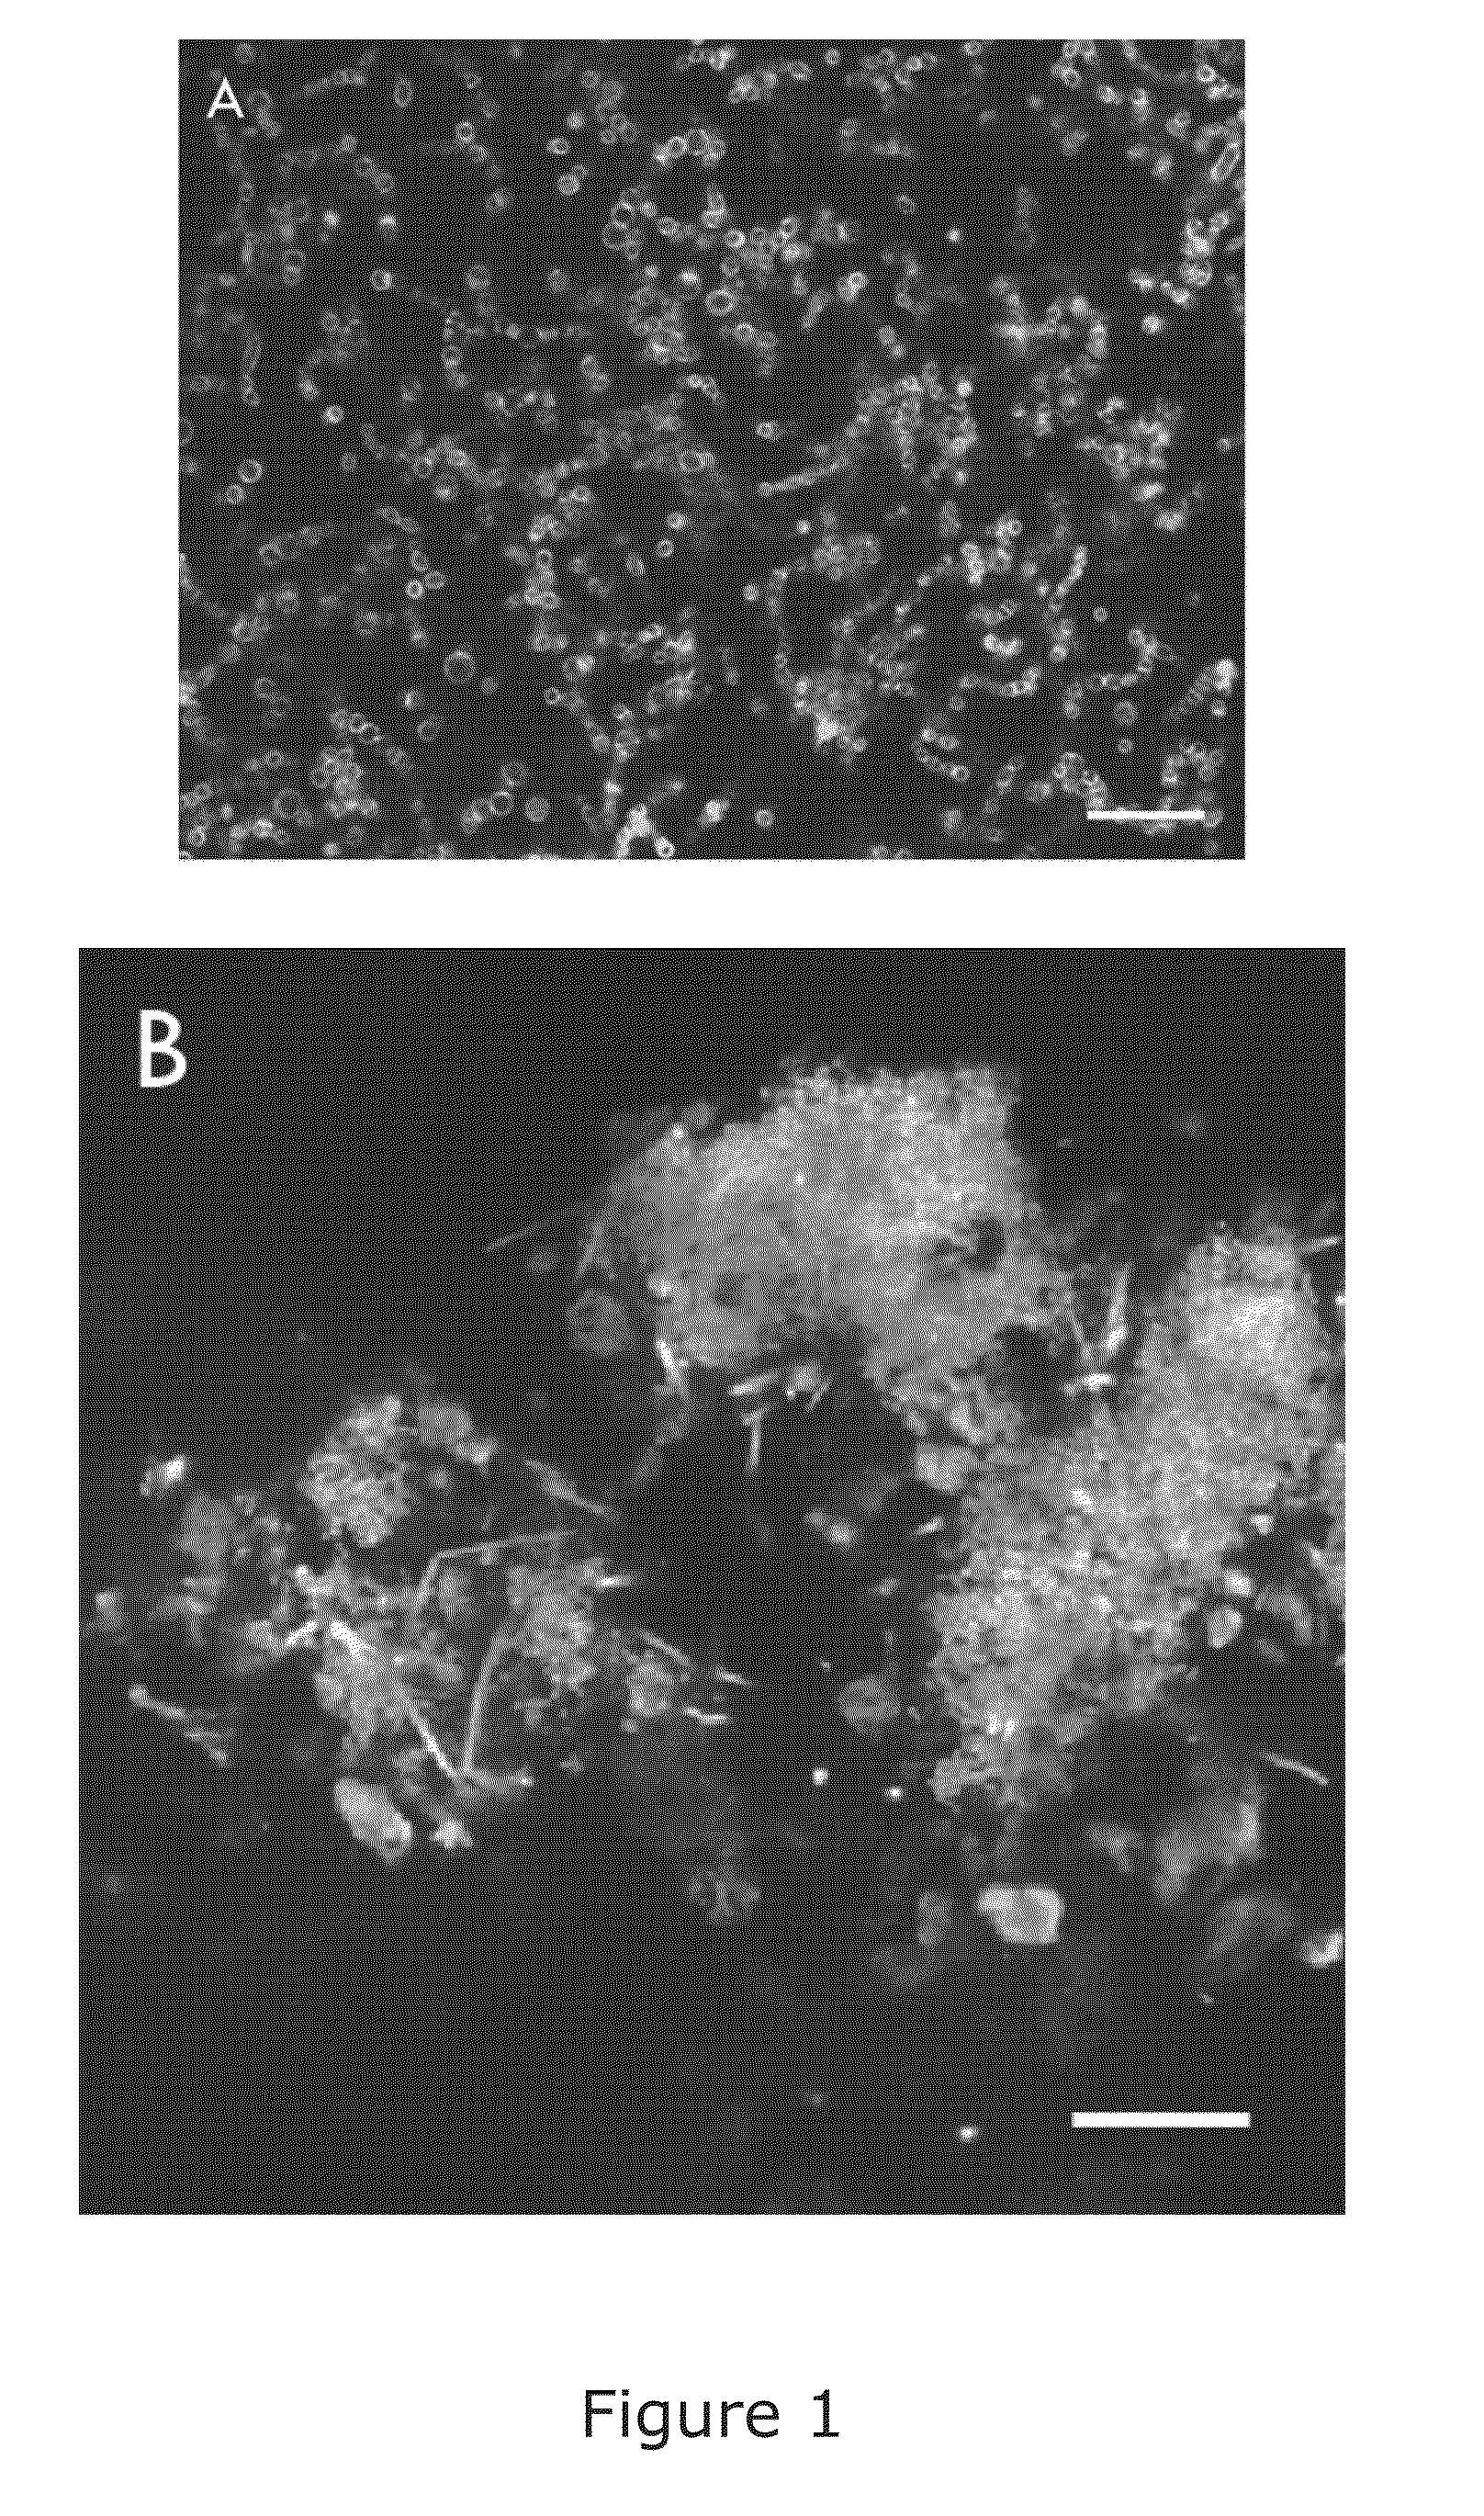 Nanoparticle aggregates containing osteopontin and calcium- and/or strontium-containing particles